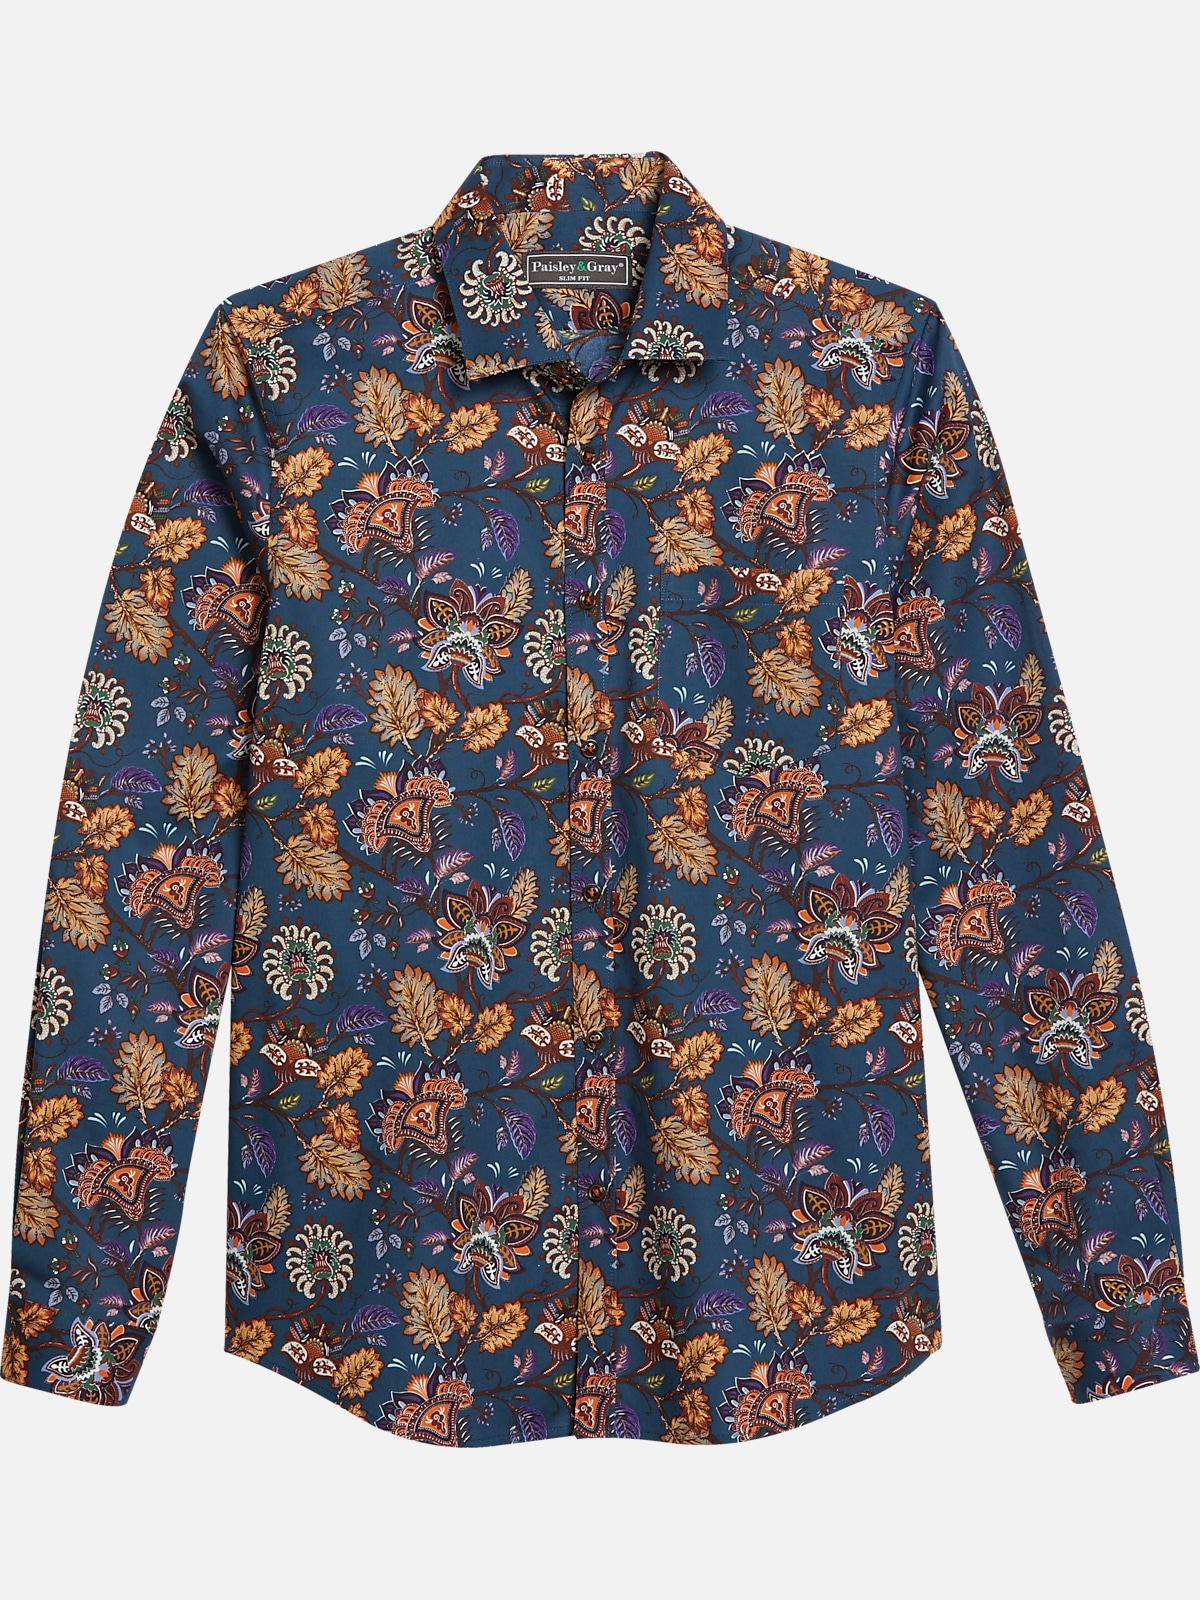 Paisley & Gray Slim Fit Leaf Pattern Sport Shirt | All Clearance $39.99 ...